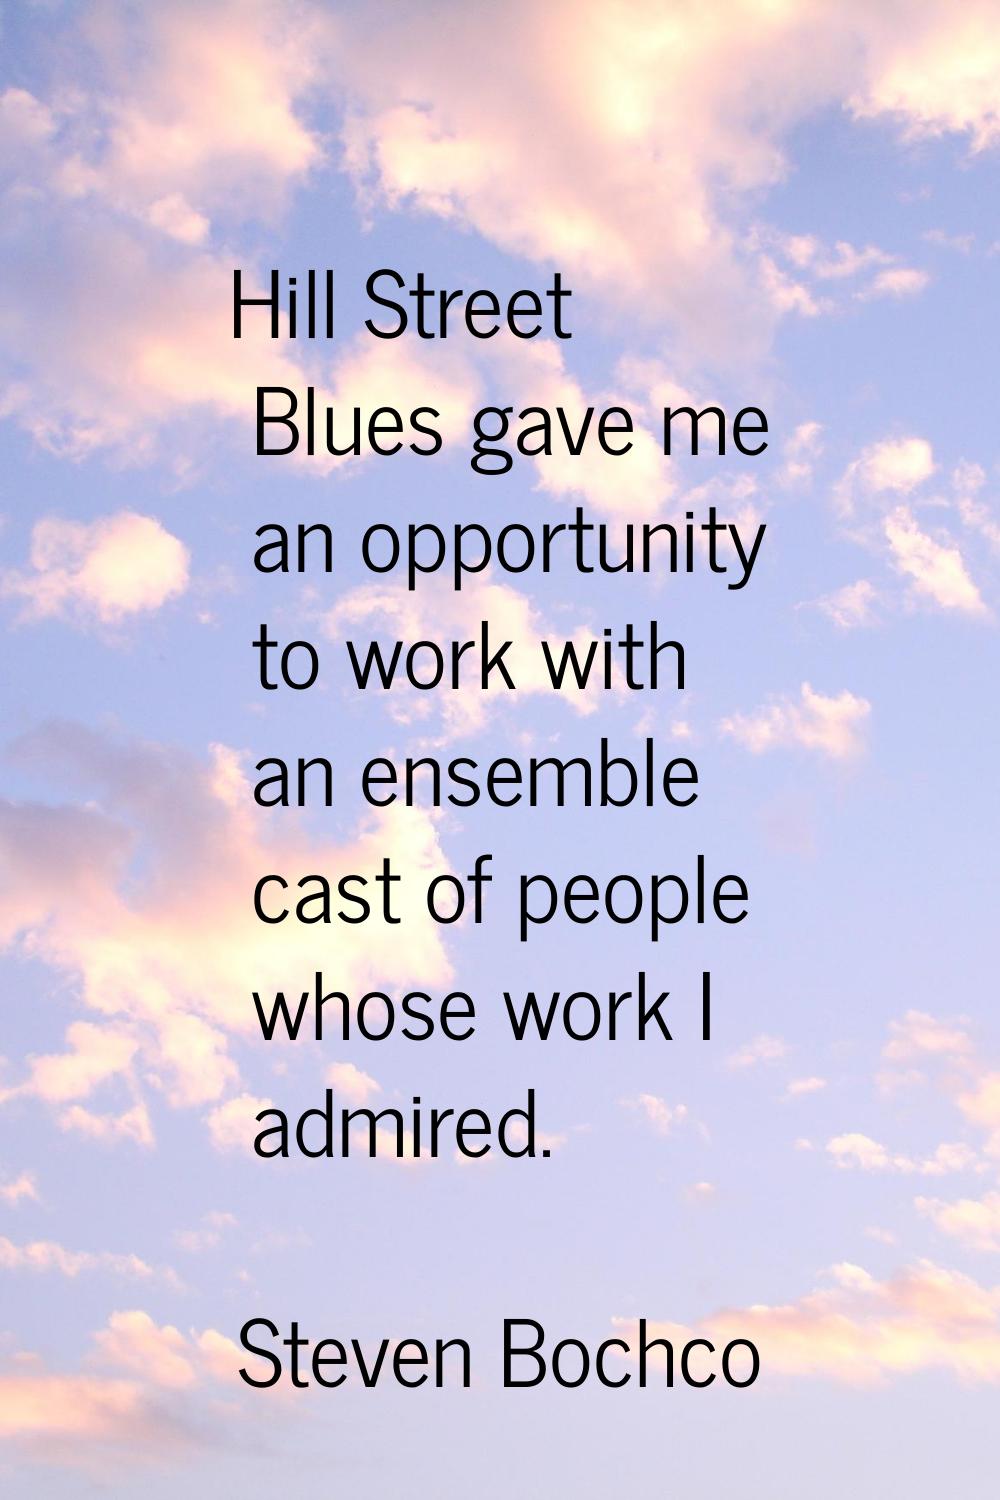 Hill Street Blues gave me an opportunity to work with an ensemble cast of people whose work I admir